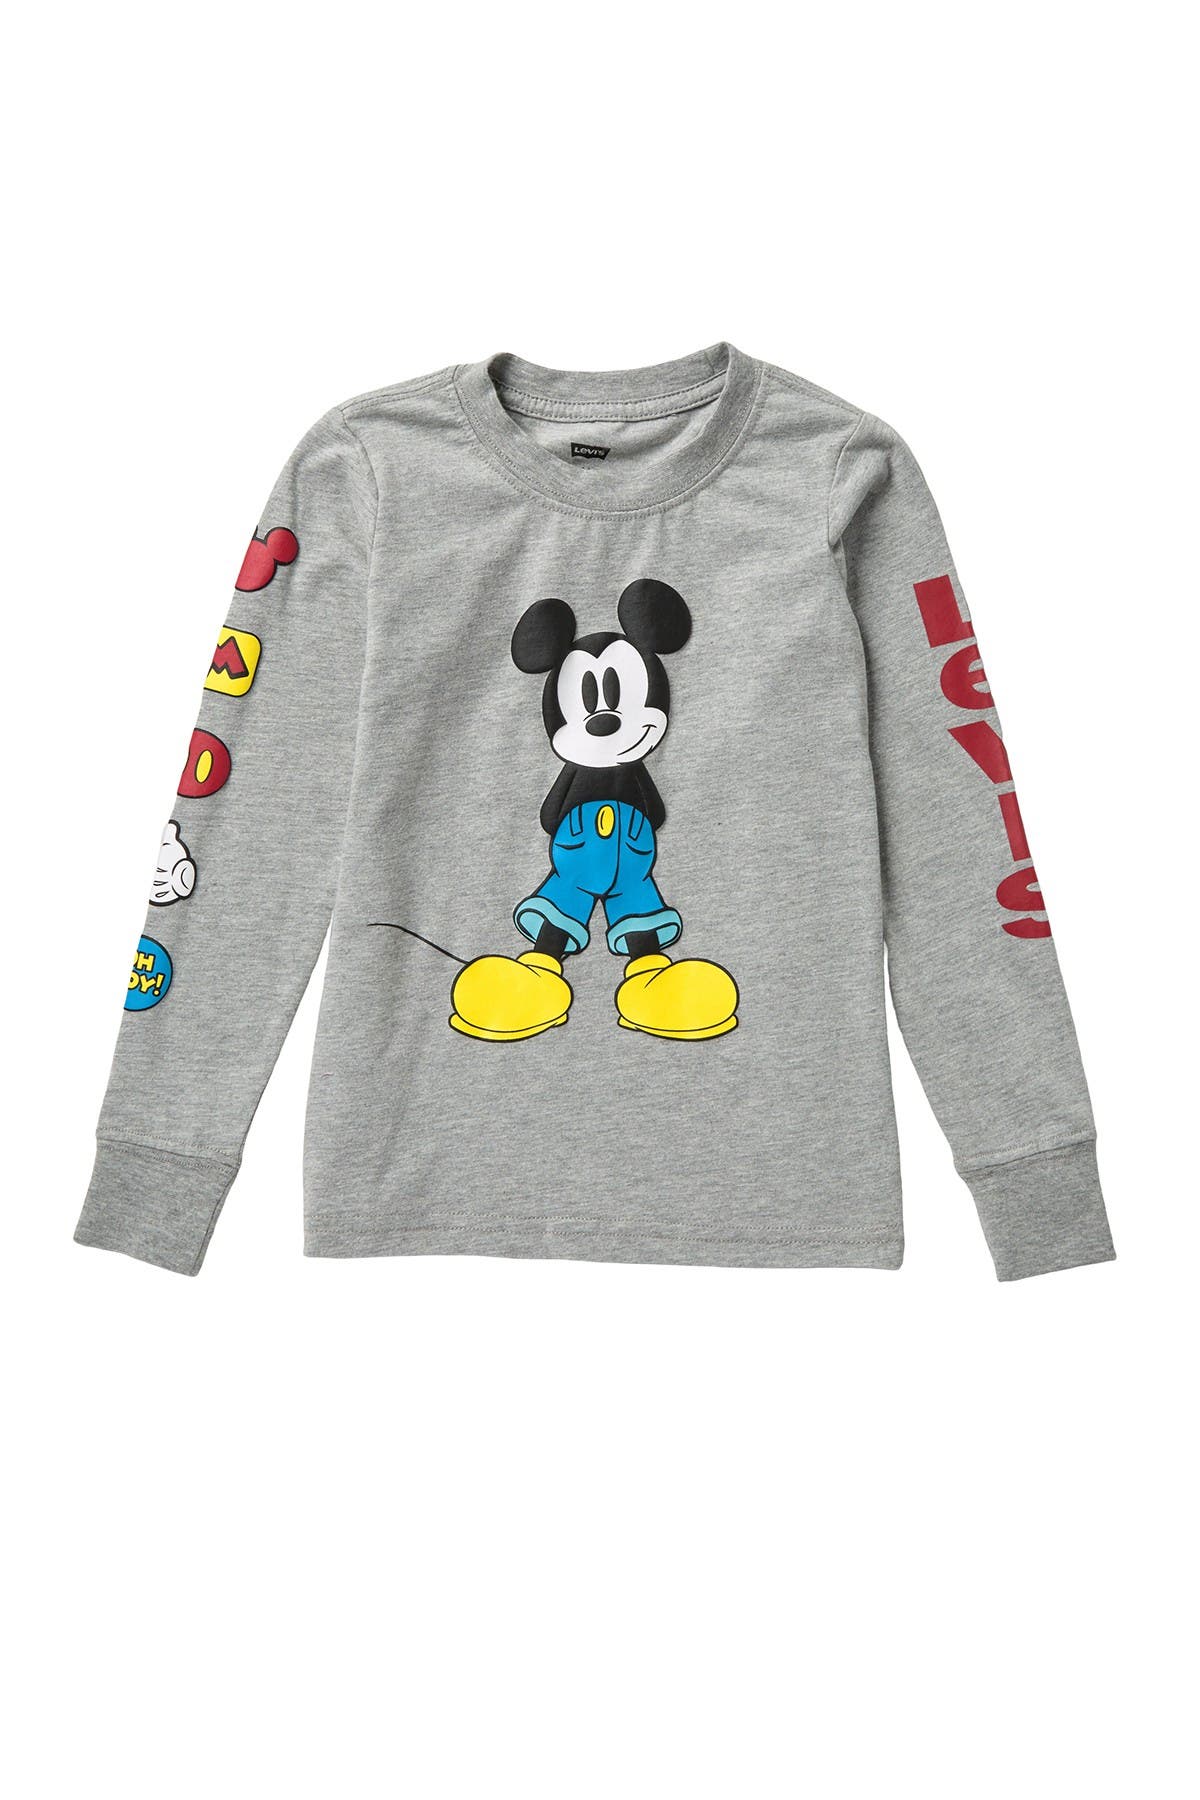 mickey mouse levi's t shirt